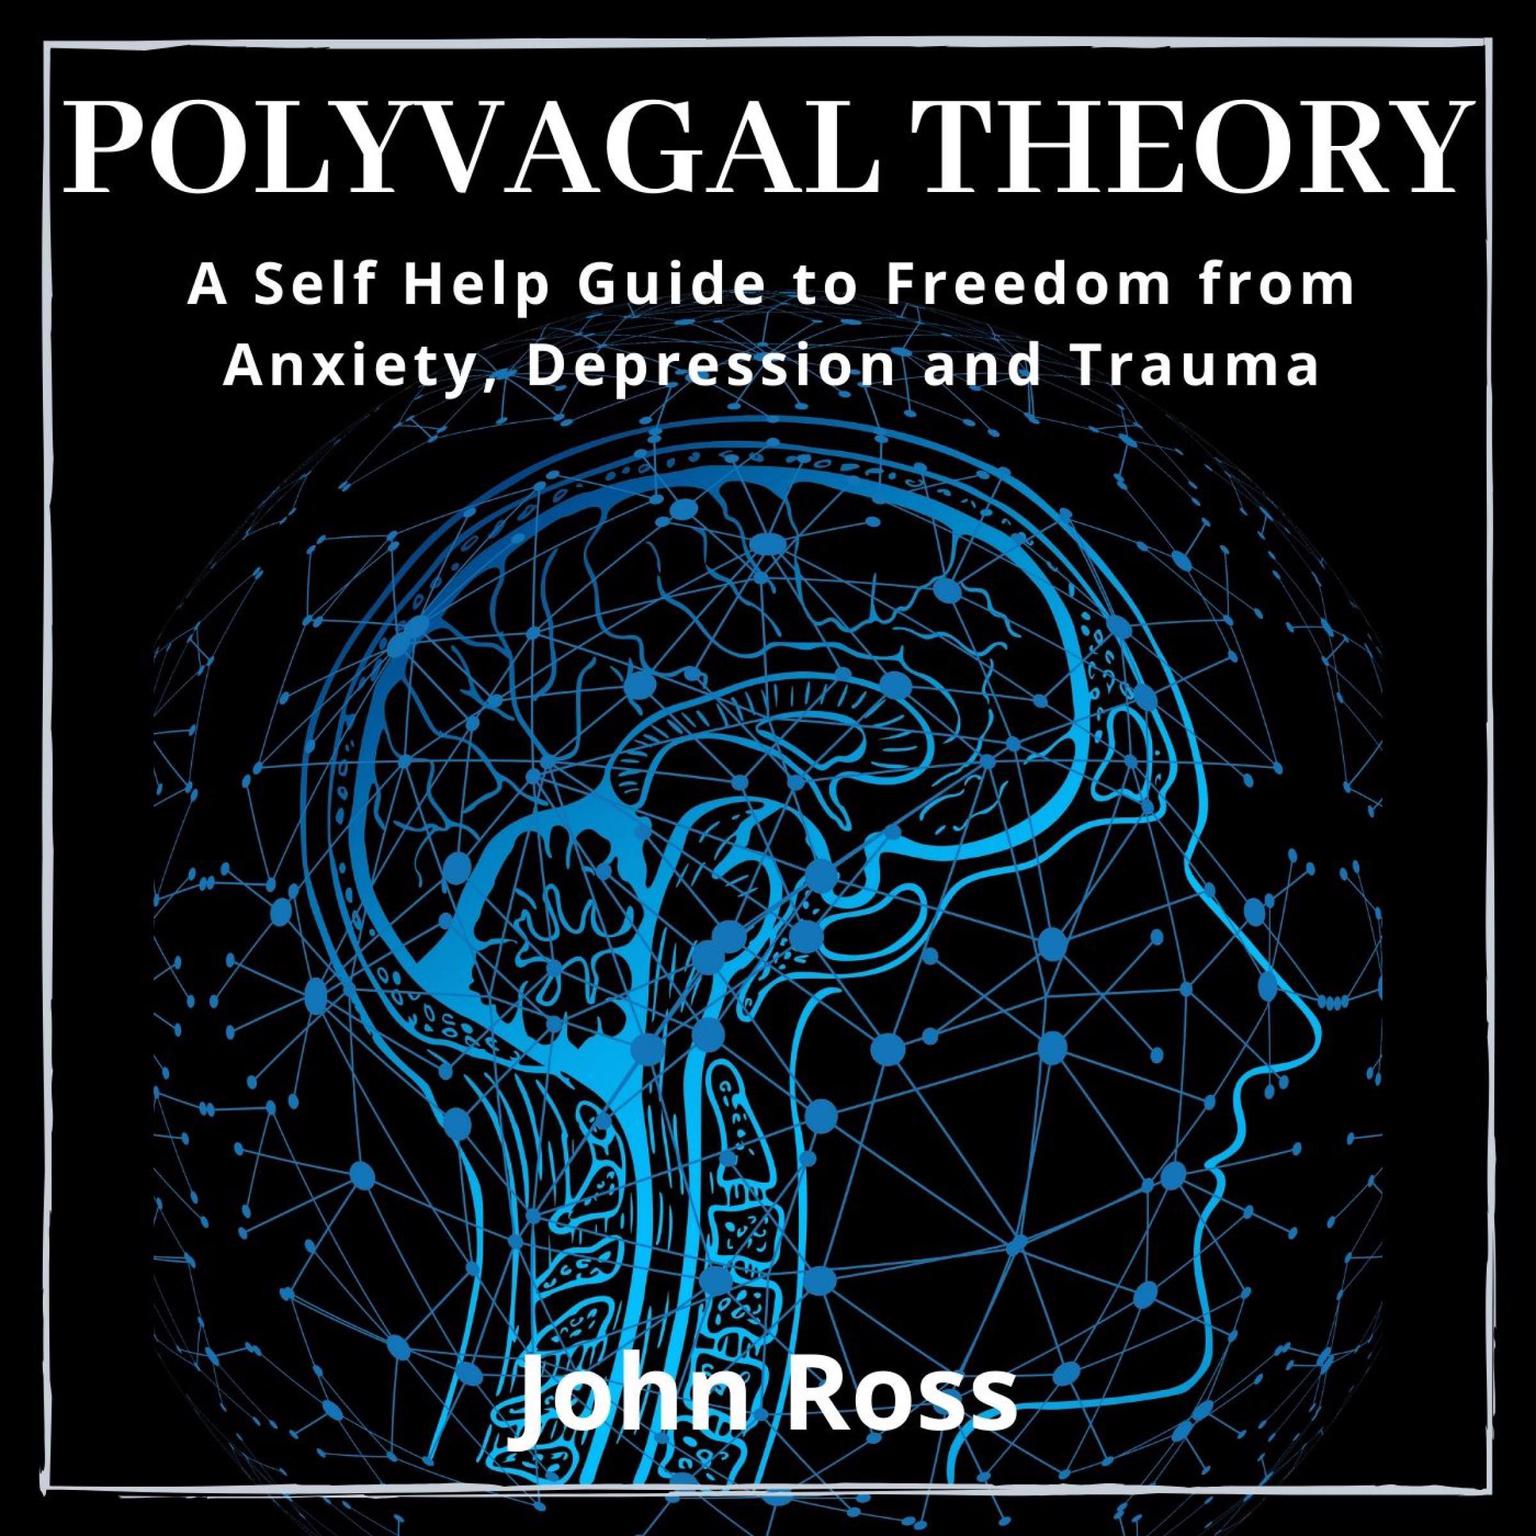 Polyvagal Theory: A Self Help Guide to Freedom from Anxiety, Depression and Trauma Audiobook, by John Ross